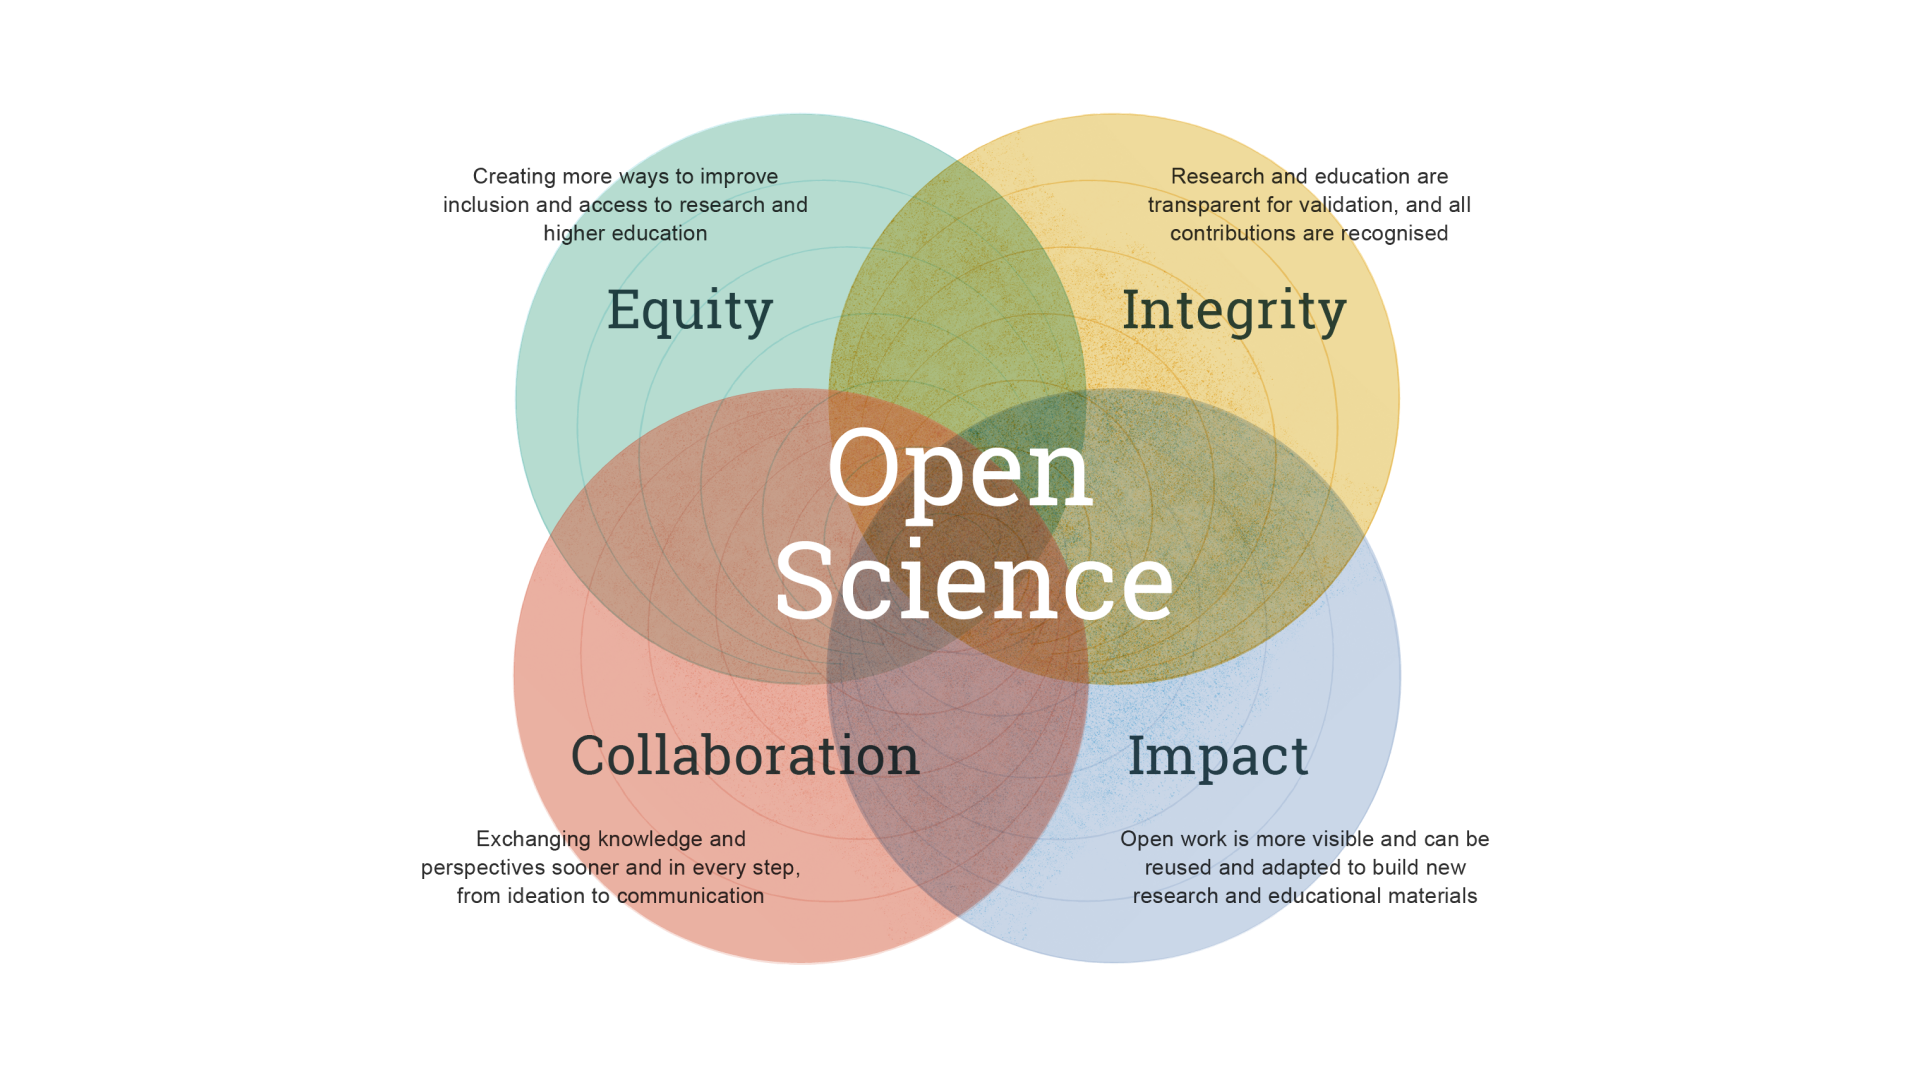 Four impacts of open science visualised with overlapping circles.